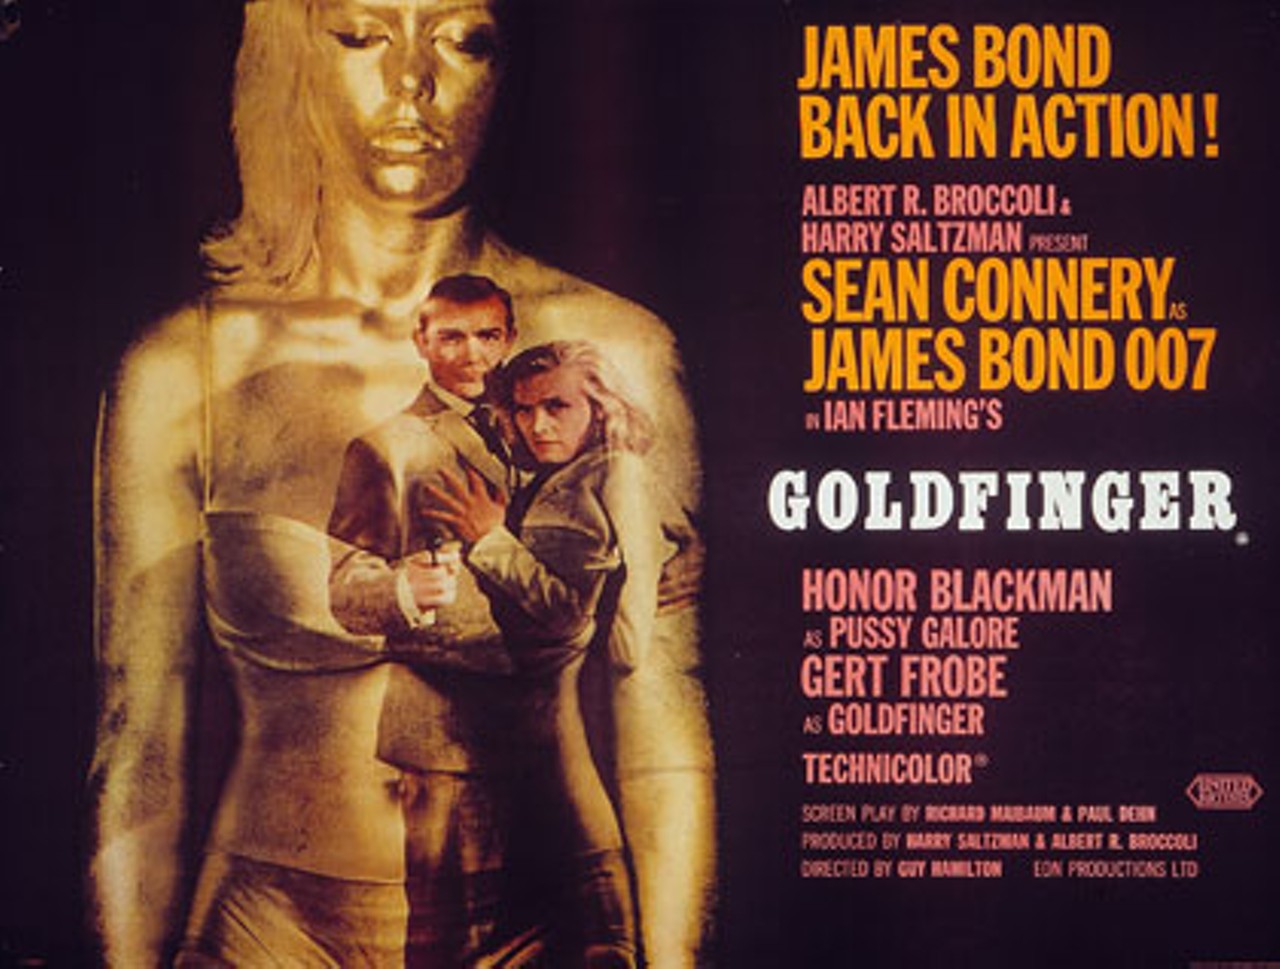 Friday-Saturday, 3/4-3/5 -
Goldfinger
@ Redford Theatre -
Hot cars, high action, and beautiful women. Is it any wonder that James Bond is still a legend after all these years? Come out to see the best Bond of them all &#151; Sean Connery, of course &#151; in the 1964 blockbuster Goldfinger. Sit back in a plush seat and enjoy the beauty of the historic Redford Theatre while munching on popcorn topped with real butter, and enjoy a classic film the way it was meant to be seen.
Shows at 8 p.m. on Friday and Saturday, 2 p.m. matinee on Saturday; 17360 Lahser Rd., Detroit; 313-537-2560; redfordtheatre.com; tickets are $5. Photo: British cinema poster for Goldfinger, designed by Robert Brownjohn.